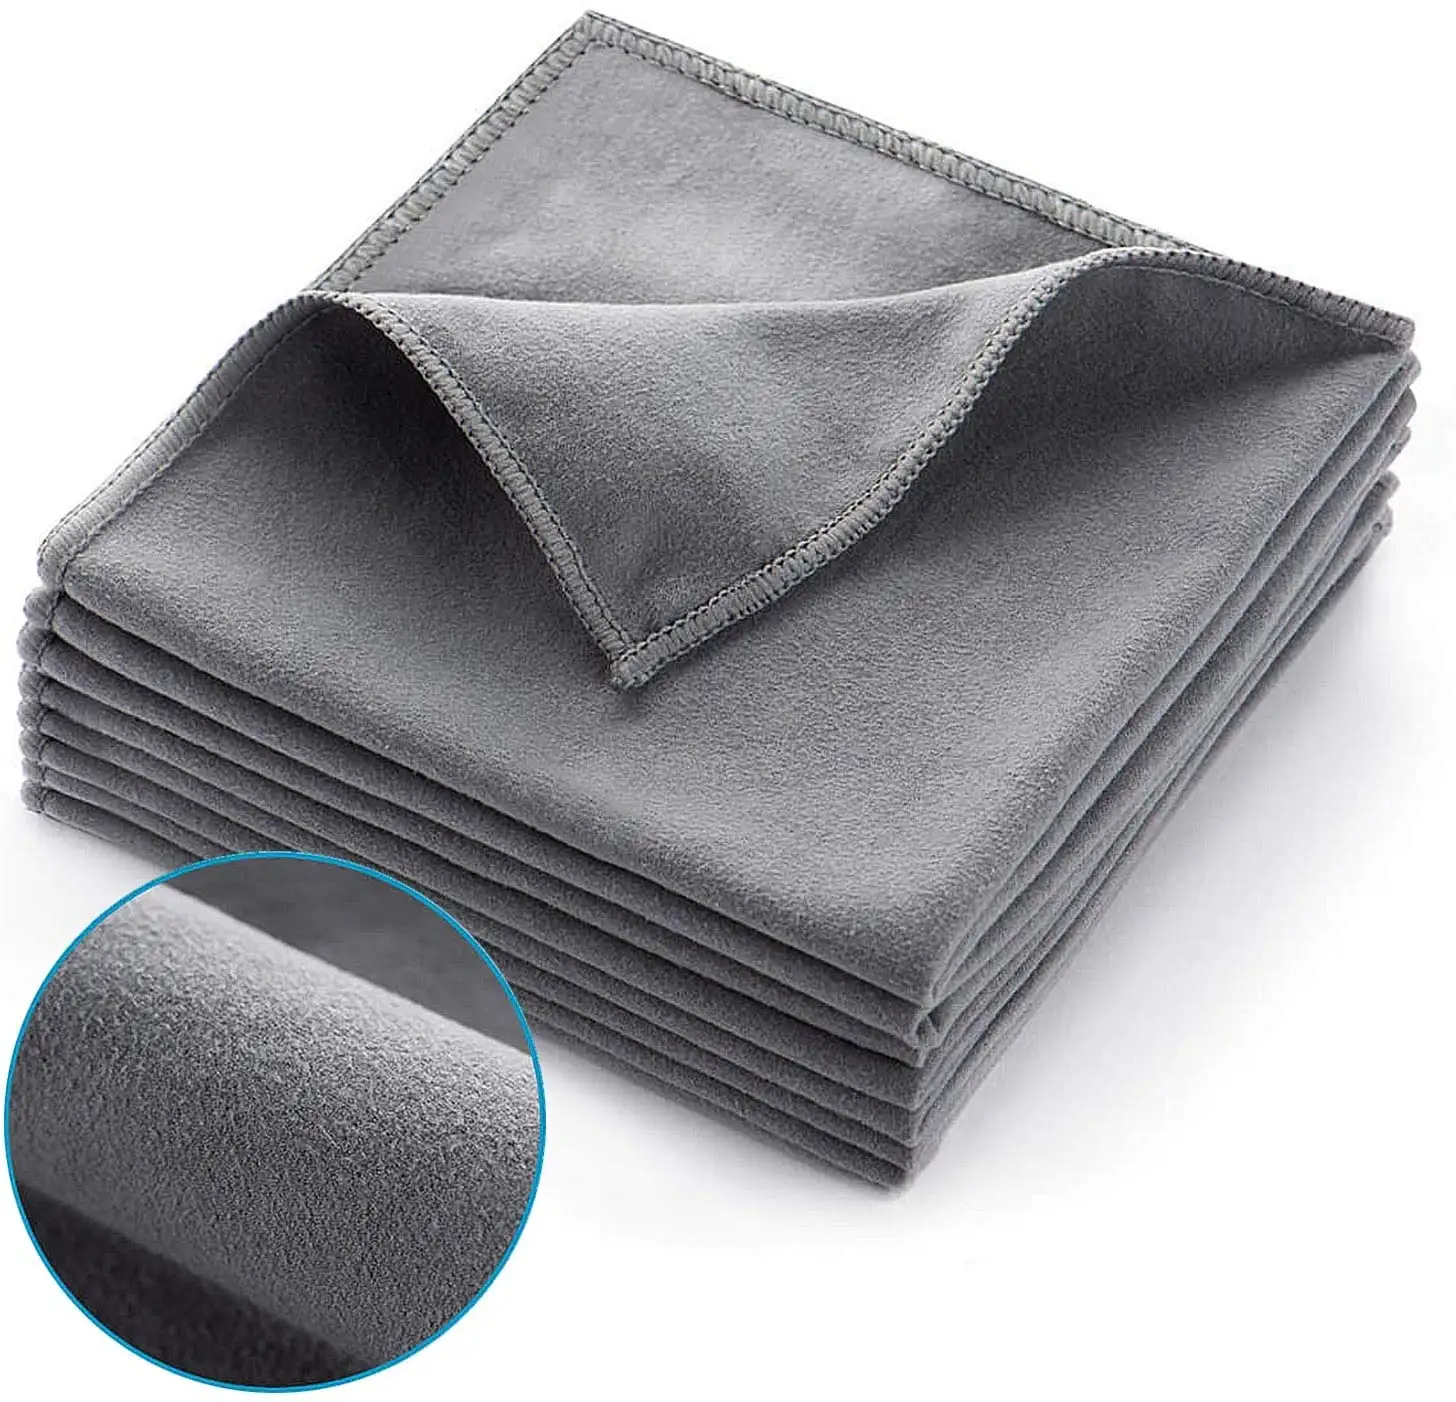 Eco-Friendly Streak-Free Suede Microfiber Cloth for Everyday Kitchen Cleaning and Jewelry Care